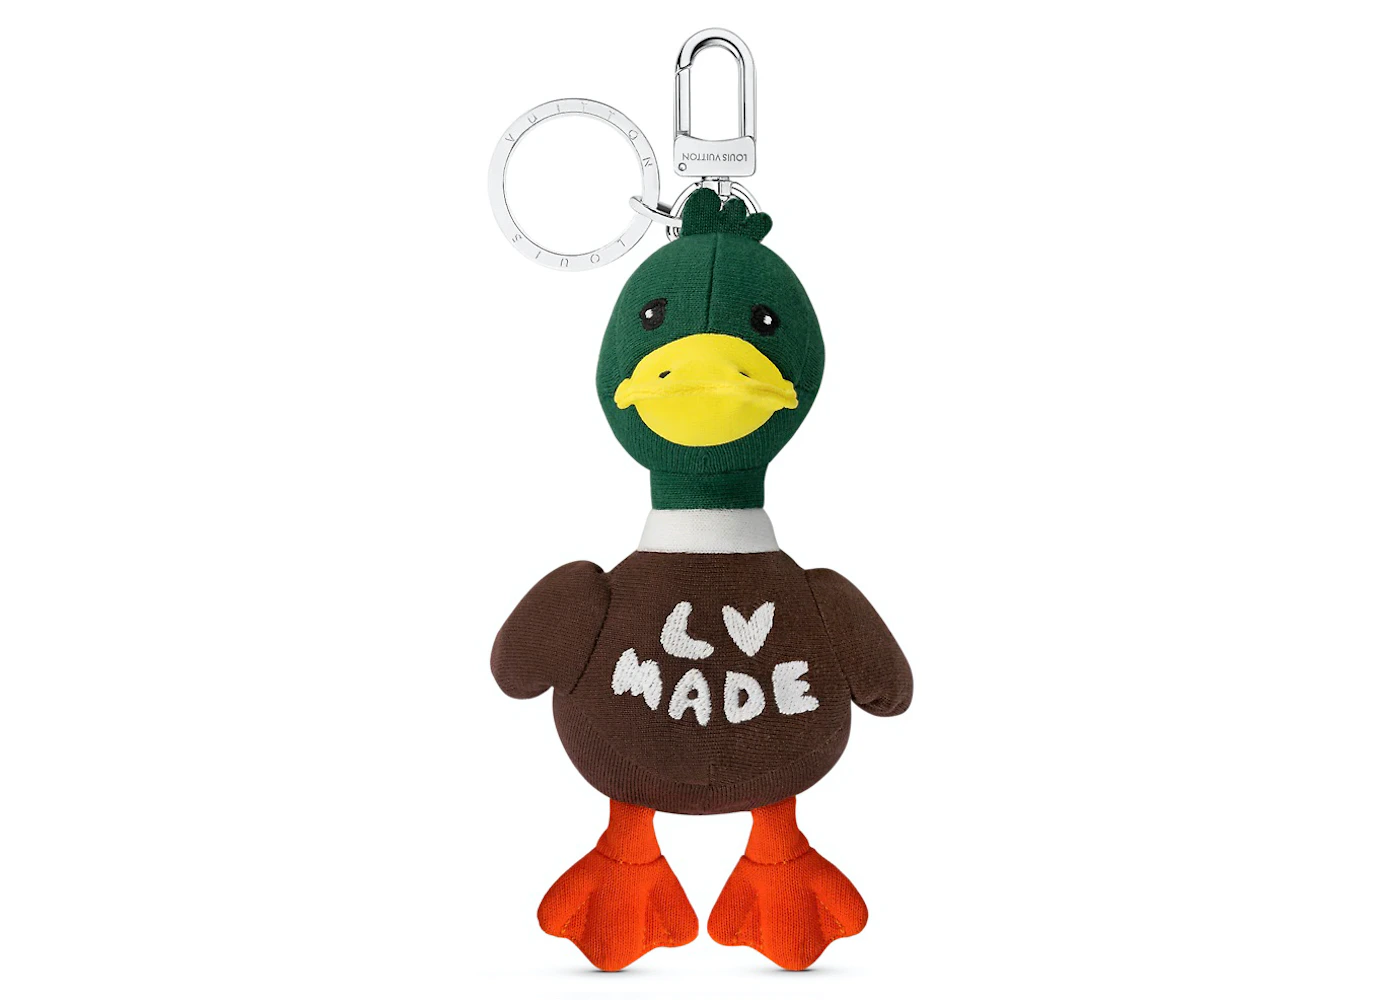 lv made duck